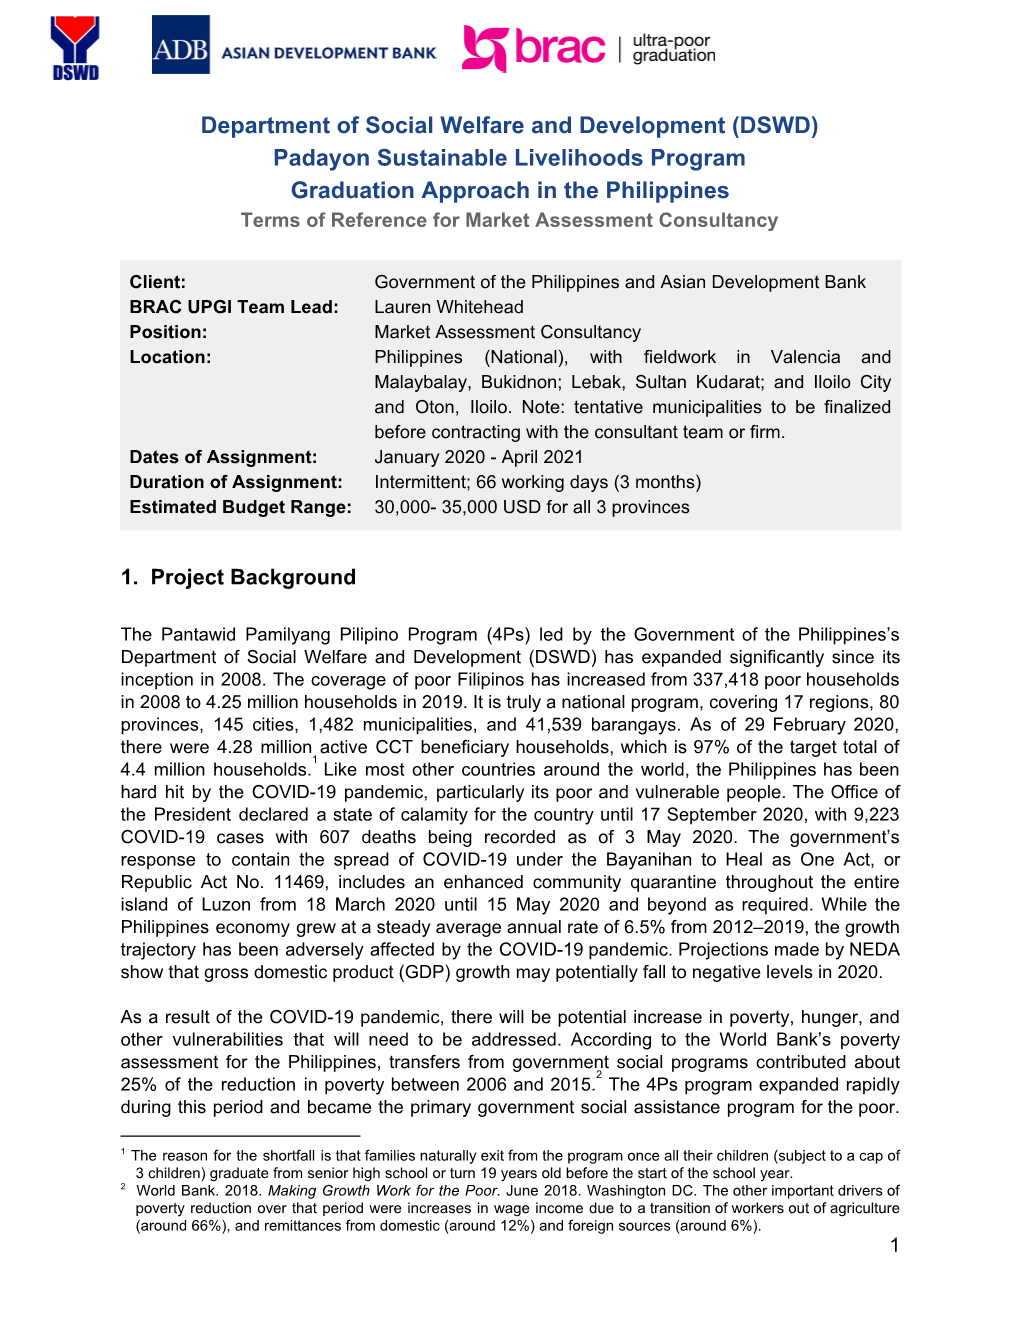 (DSWD) Padayon Sustainable Livelihoods Program Graduation Approach in the Philippines Terms of Reference for Market Assessment Consultancy